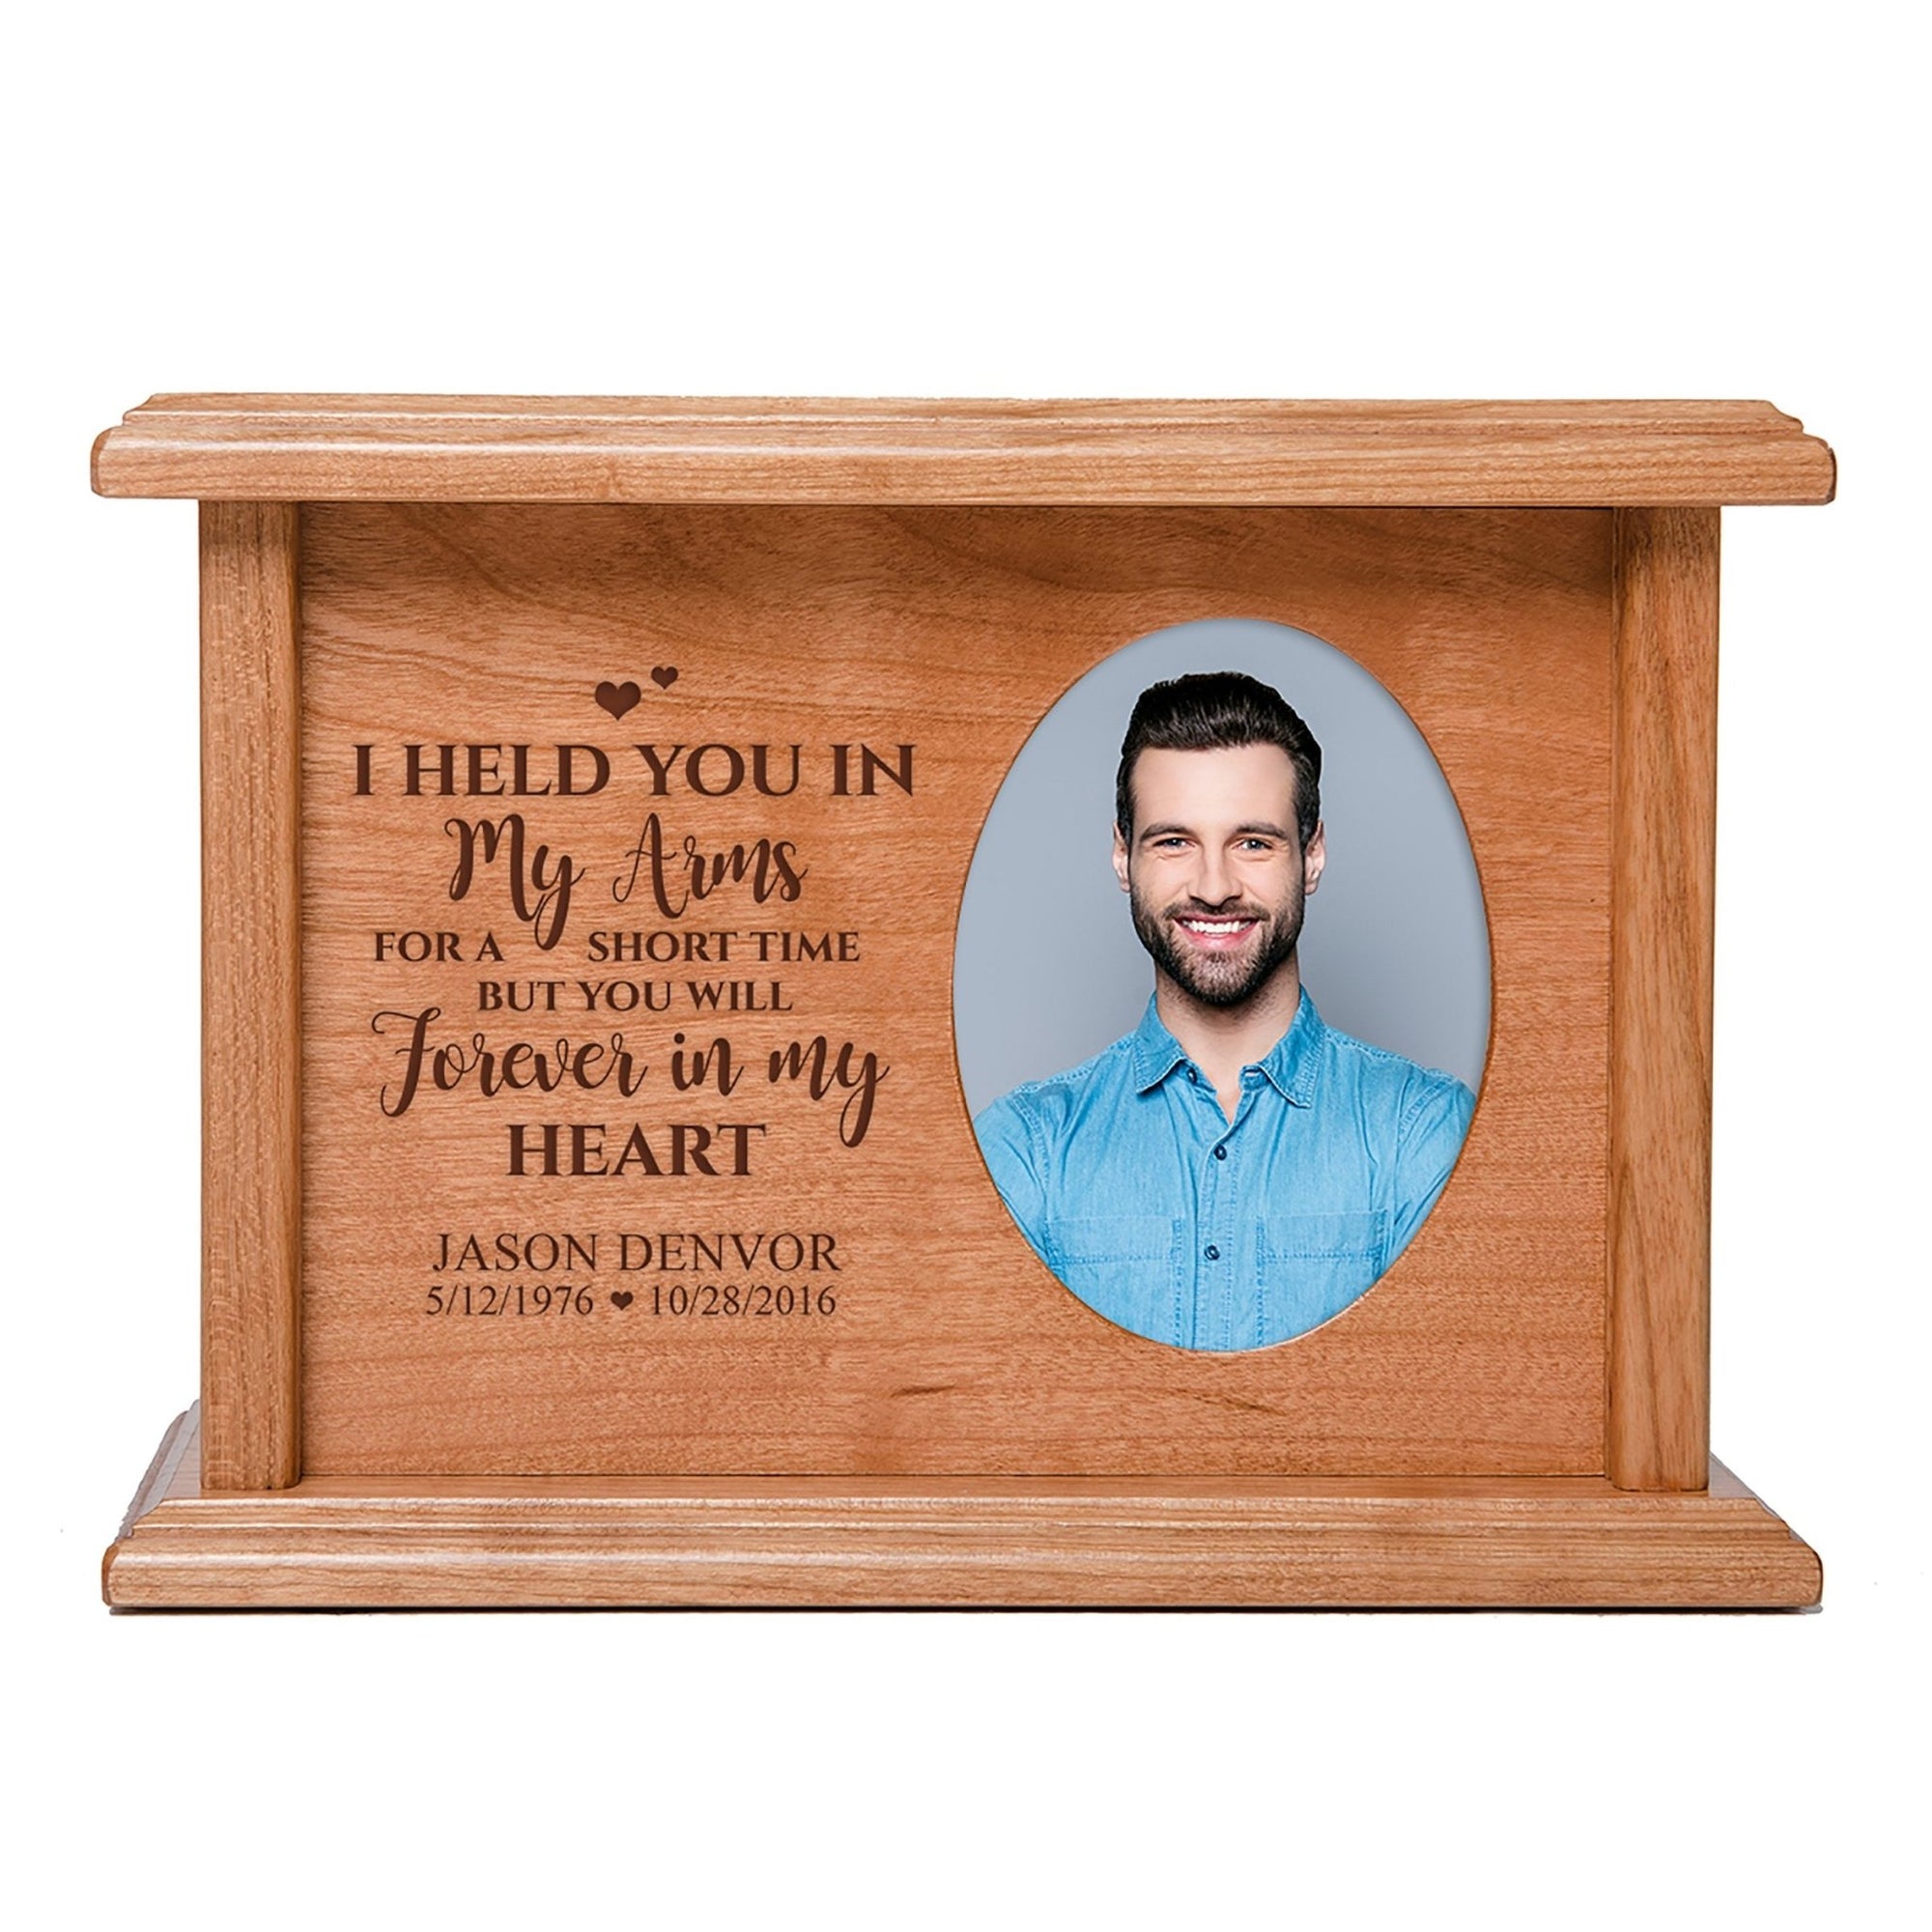 Custom Memorial Cremation Urn Box for Human Ashes holds 2x3 photo and holds 65 cu in I Held You In My Arms - LifeSong Milestones